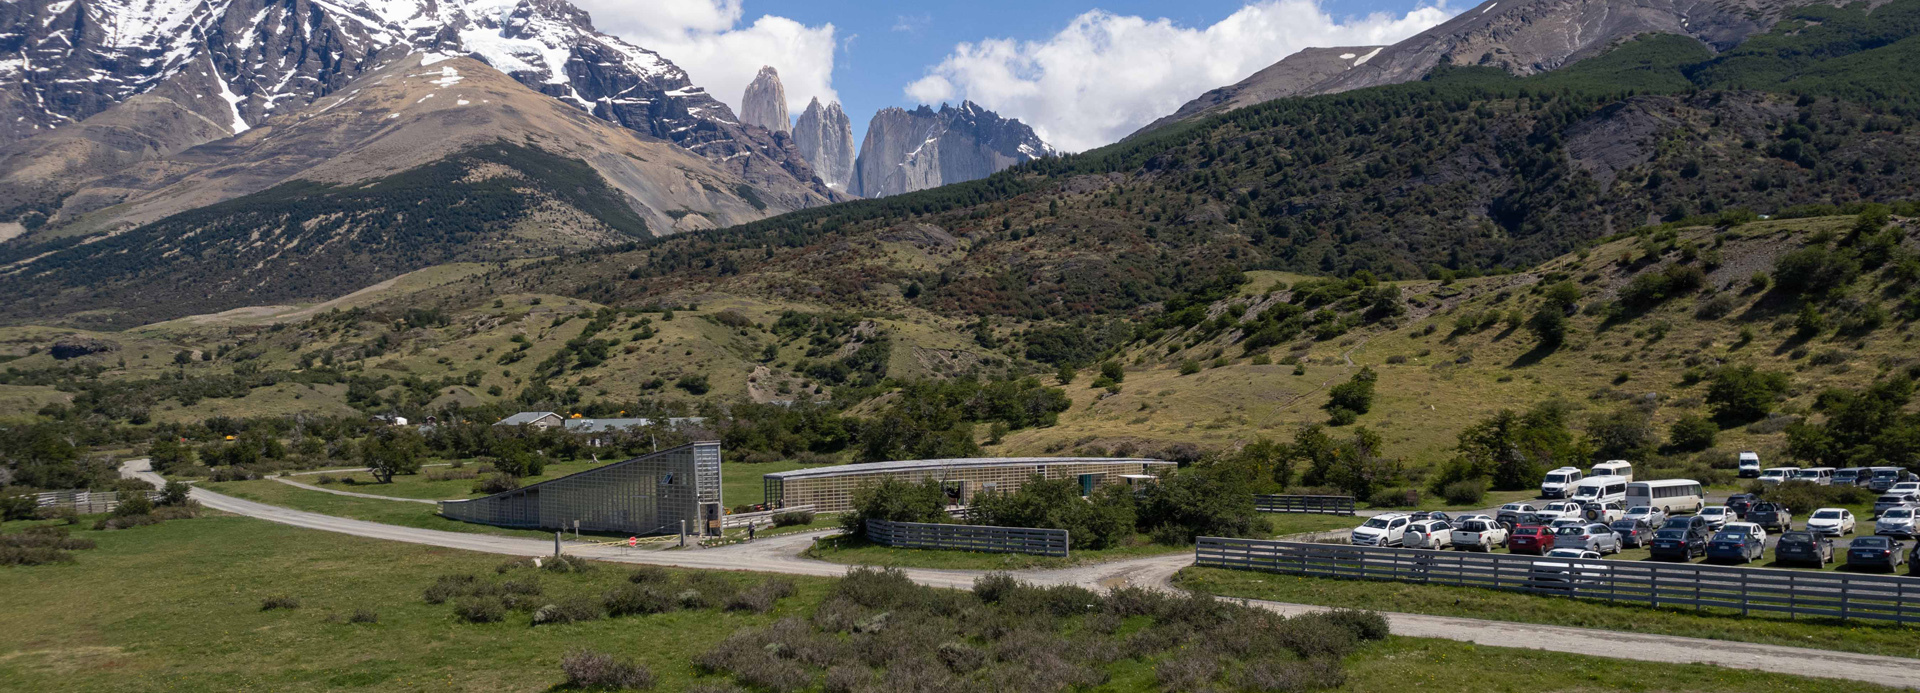 Where to stay in Torres del Paine?